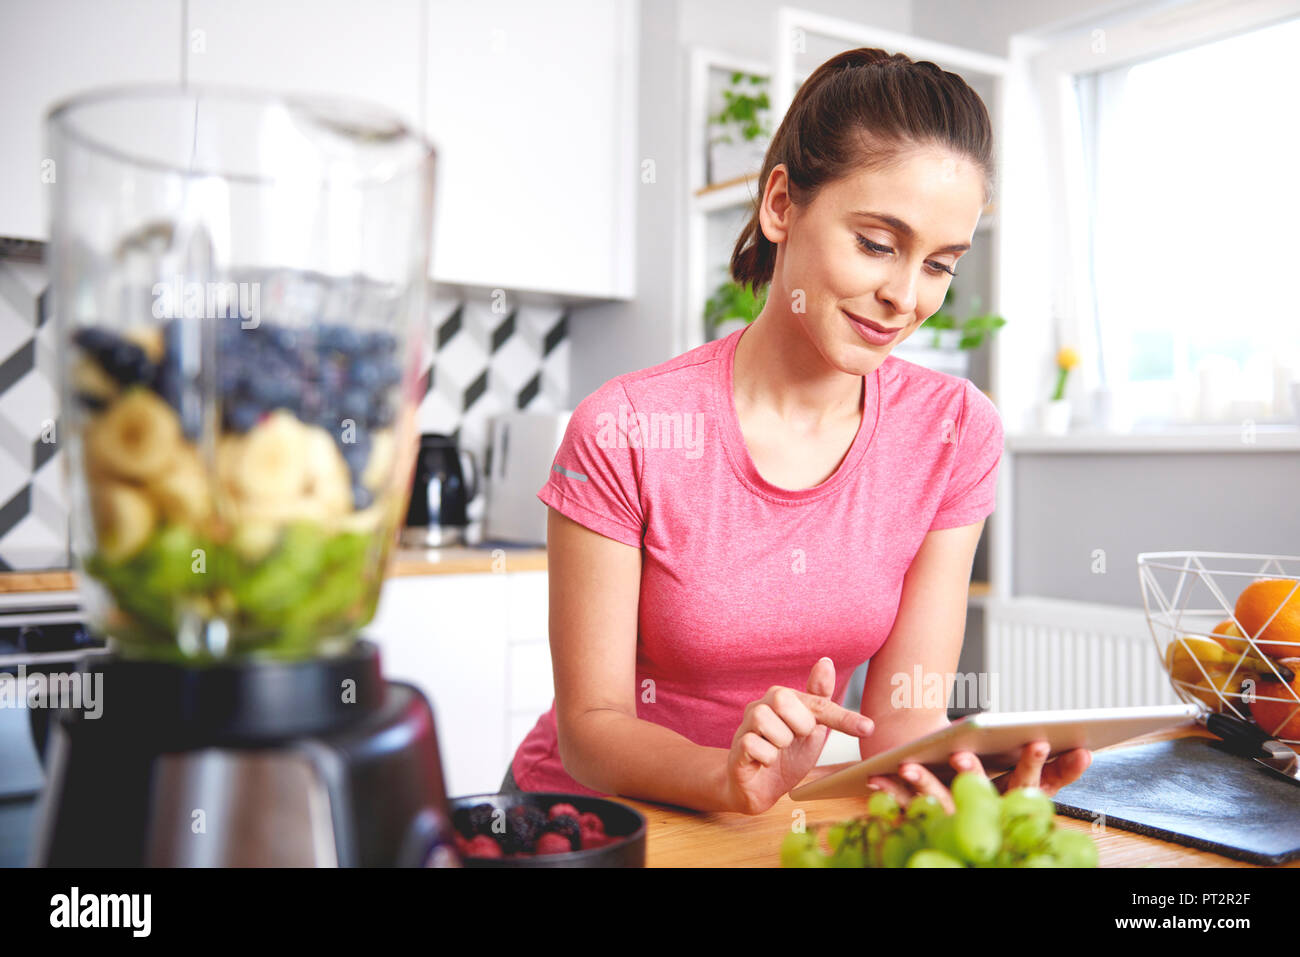 Portrait of smiling young woman using tablet in the kitchen Stock Photo